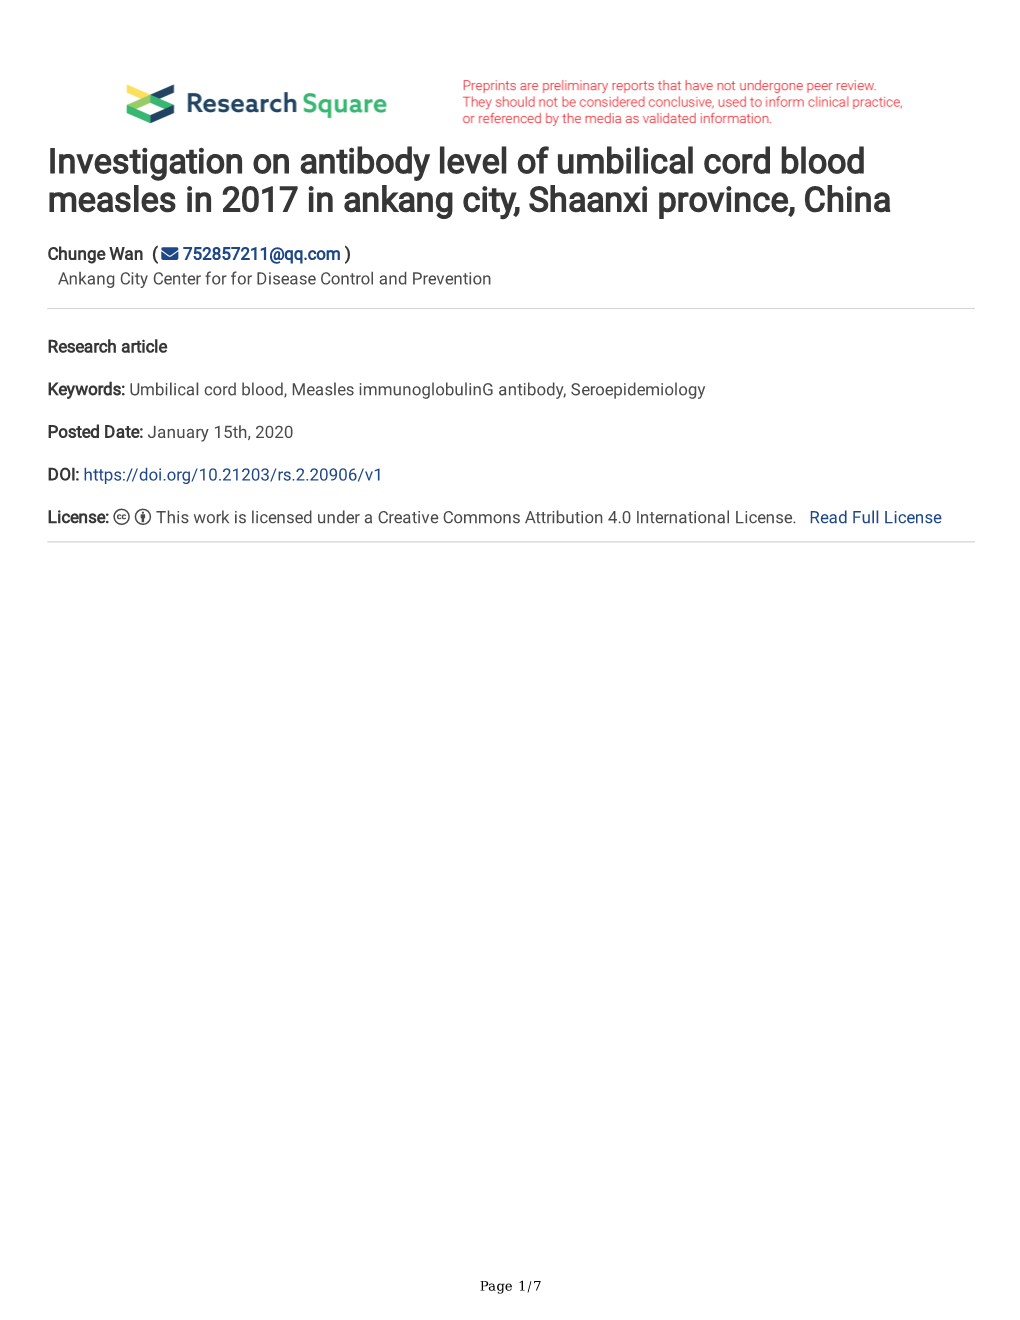 Investigation on Antibody Level of Umbilical Cord Blood Measles in 2017 in Ankang City, Shaanxi Province, China